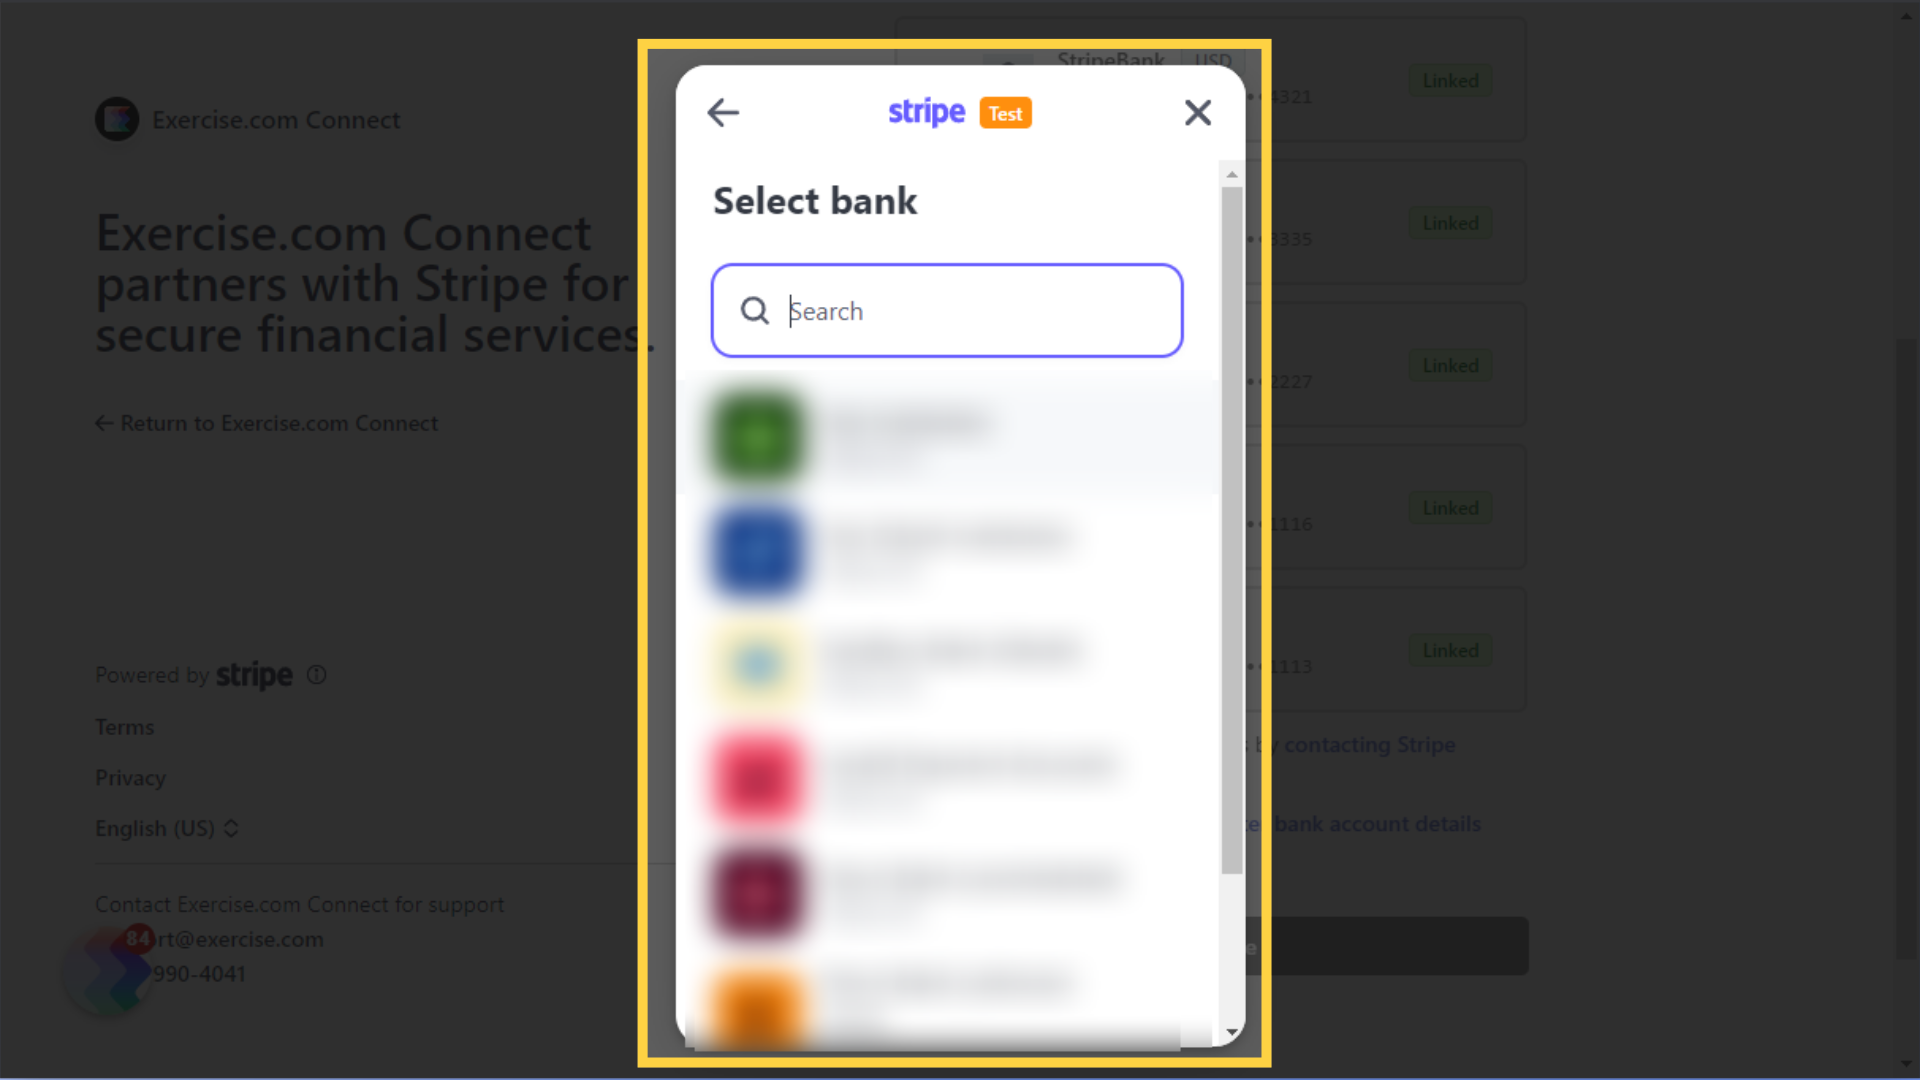 Use the bank finder to select your bank and sign in securely.